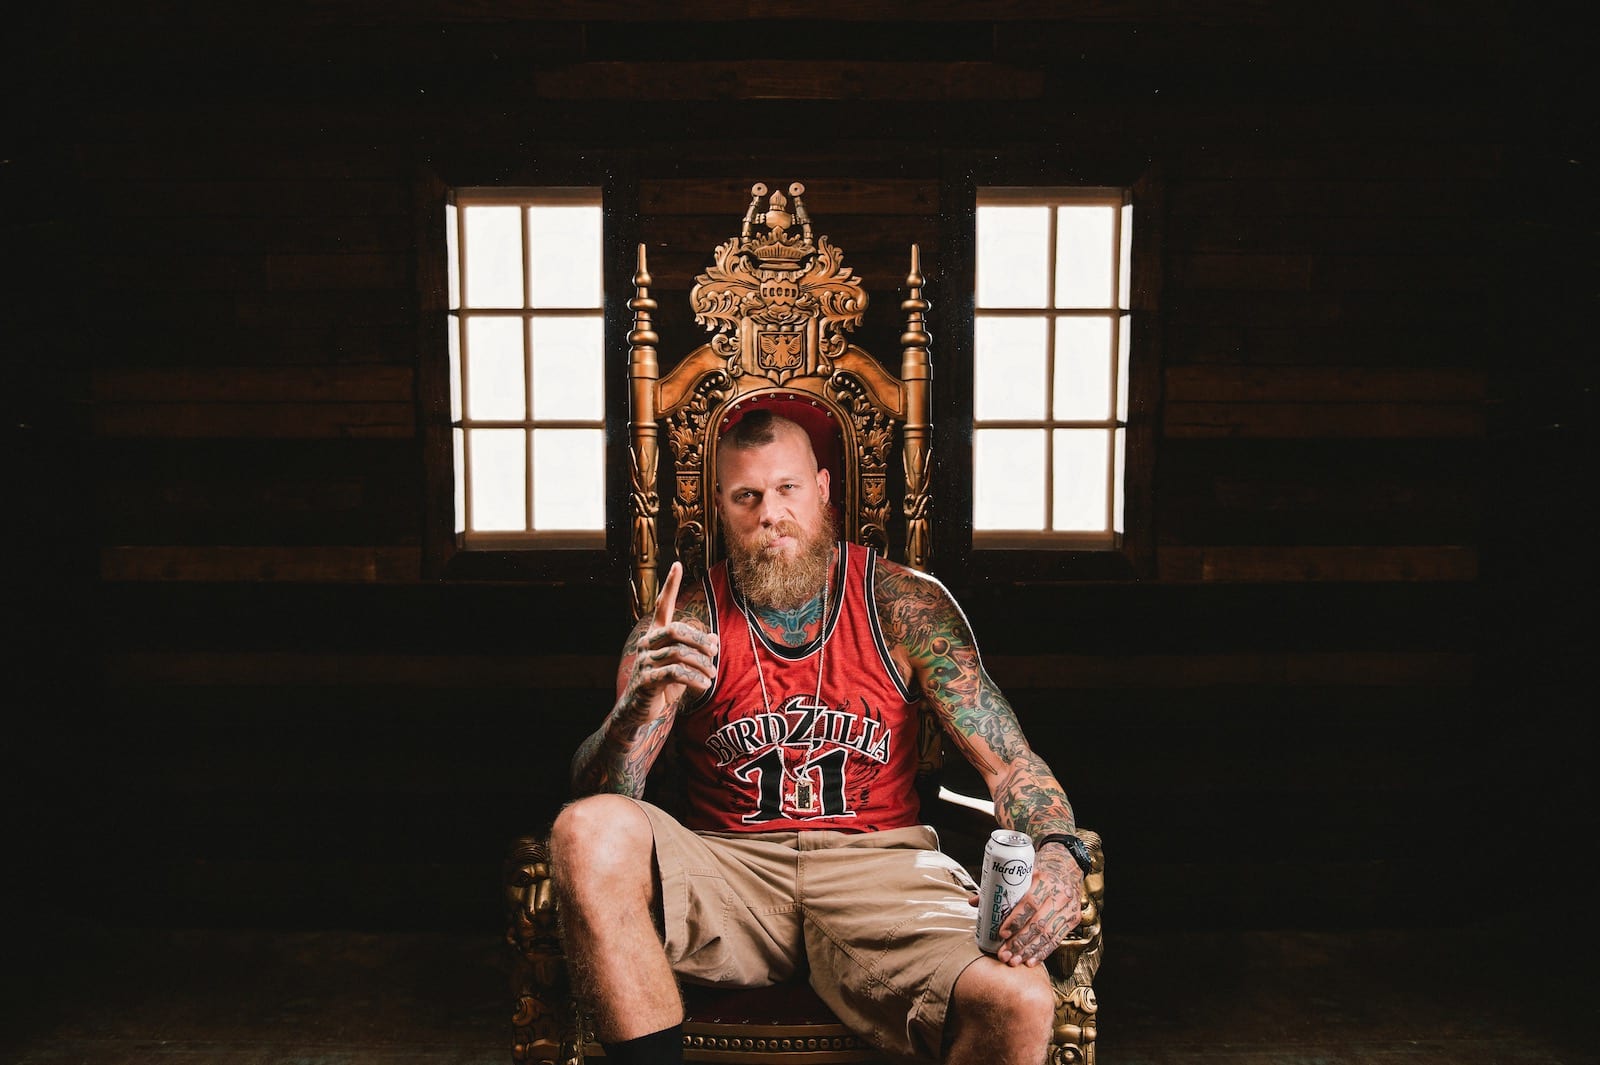 Bearded tattooed man sitting on a throne holding a Hard Rock Energy drink posing for camera